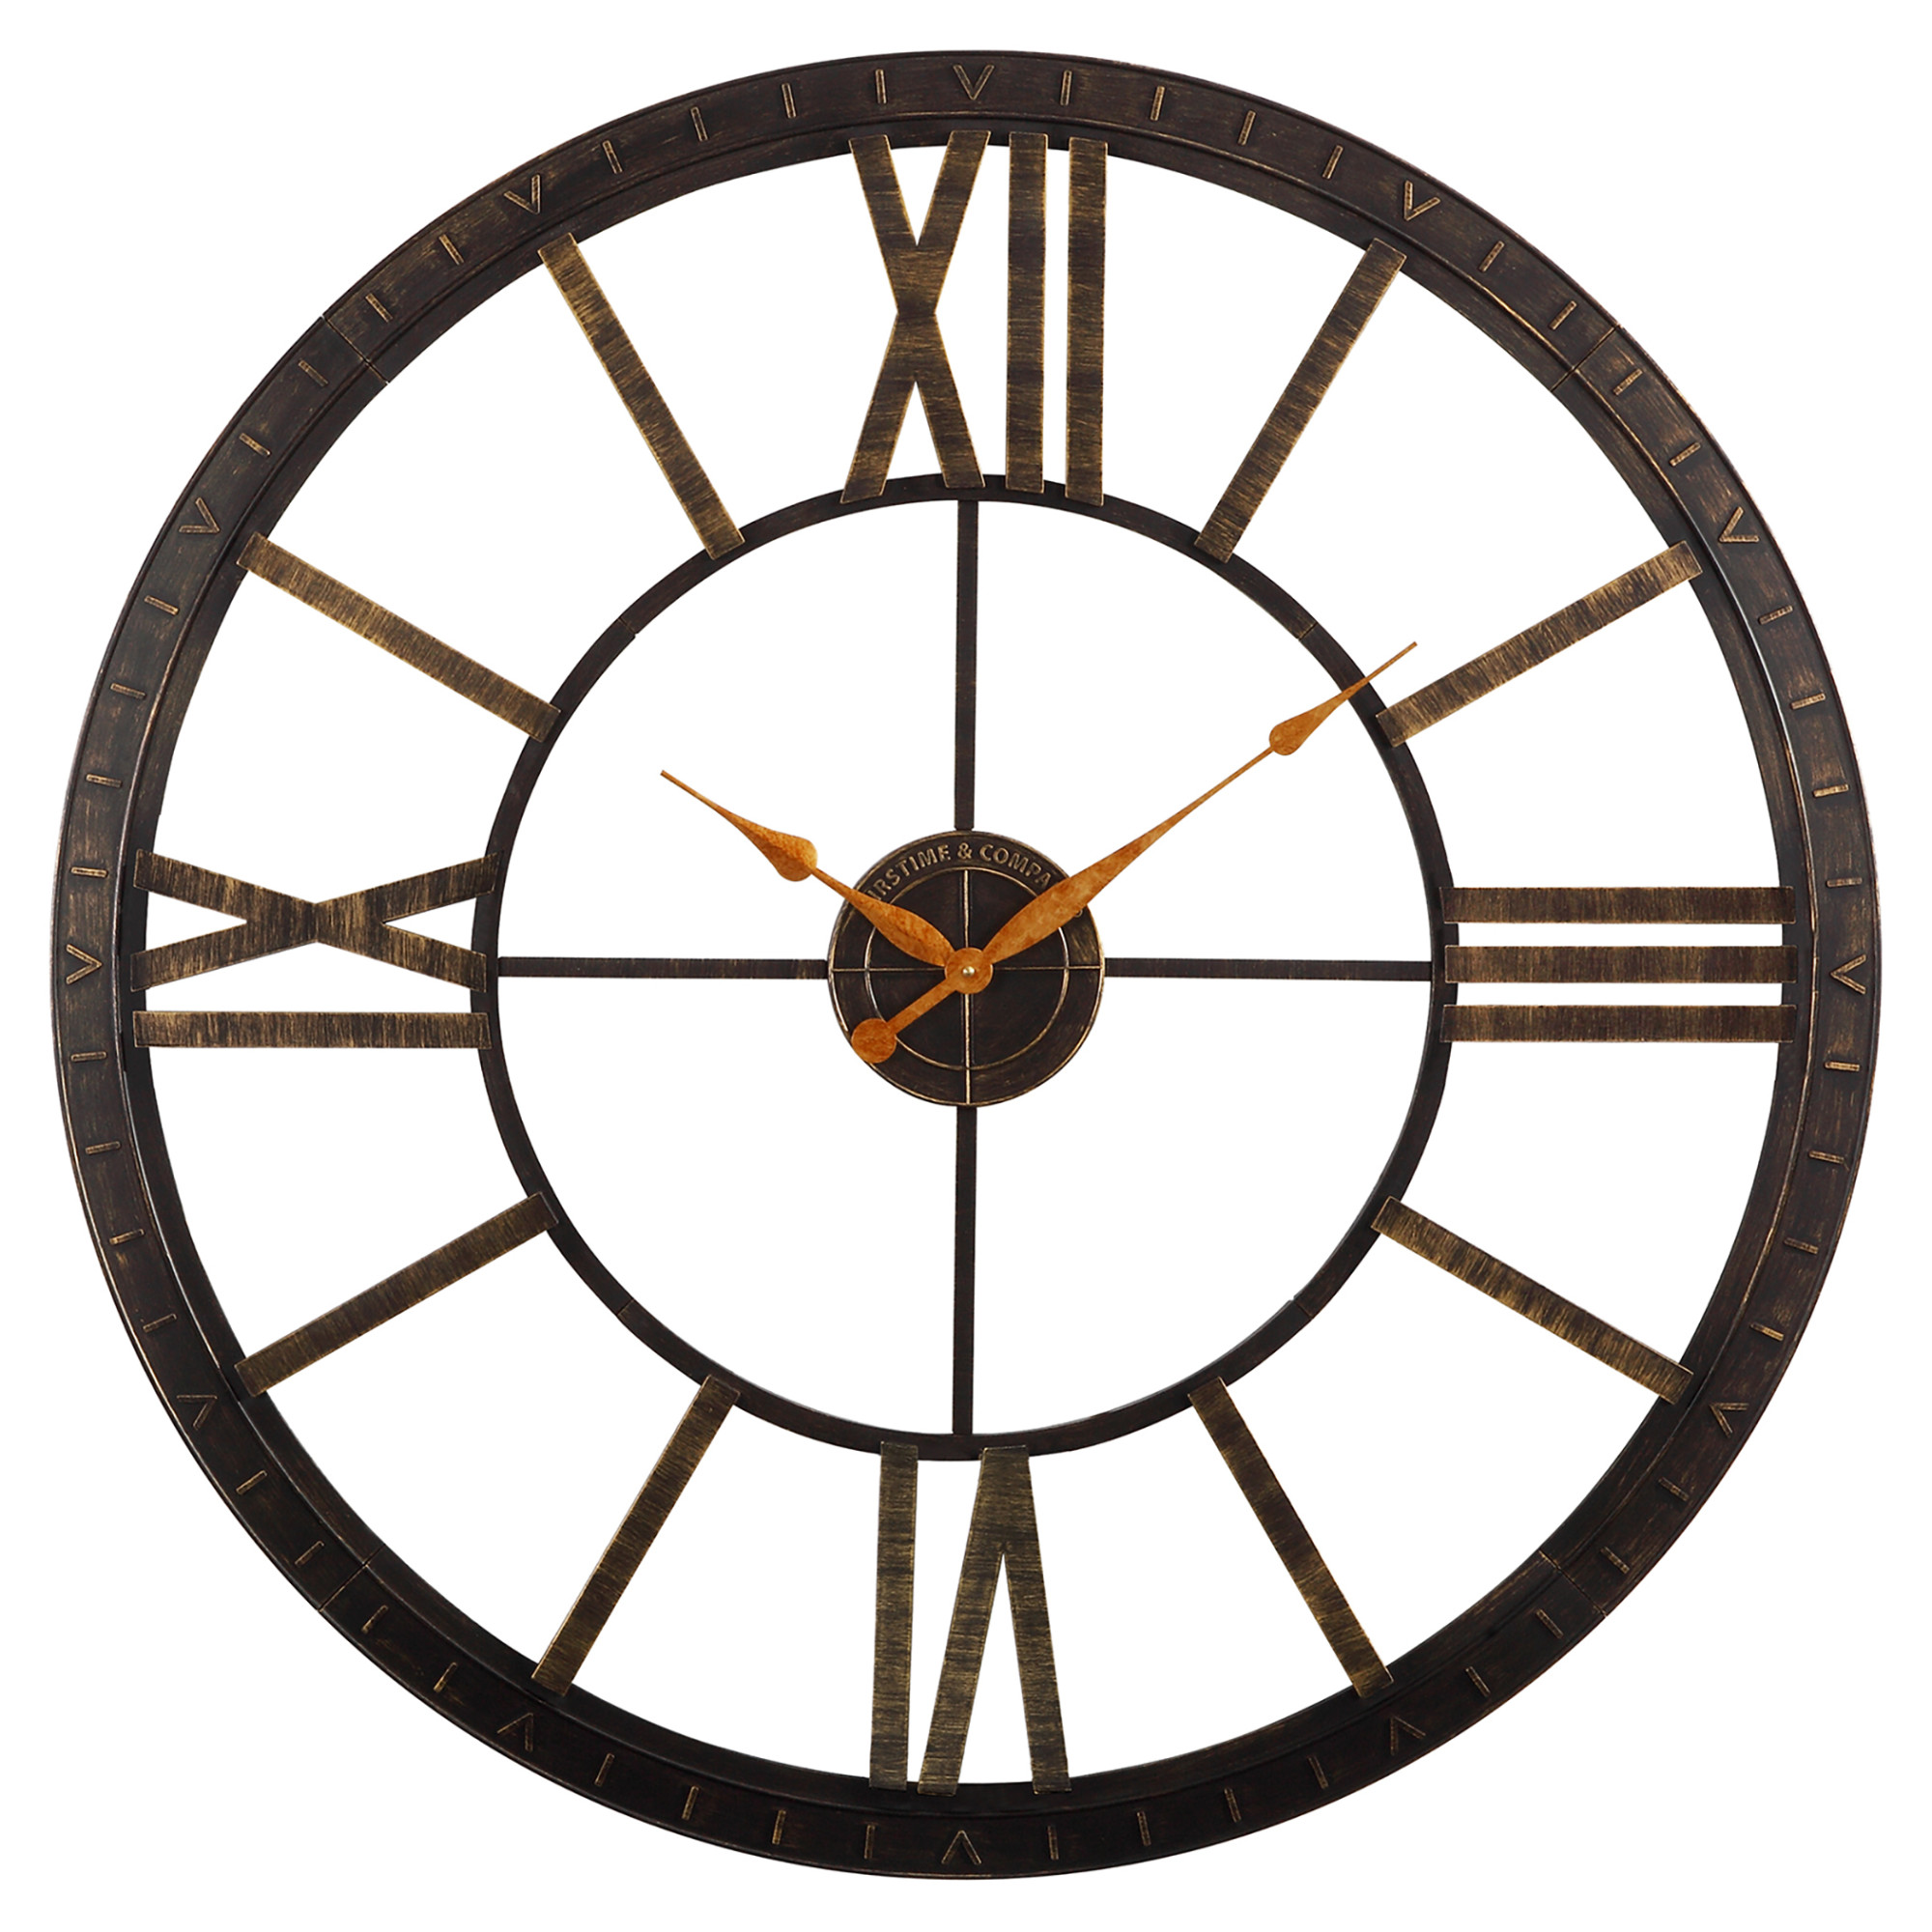 FirsTime & Co. Bronze Big Time Wall Clock, Modern, Analog, 40 x 2 x 40 in - image 4 of 8